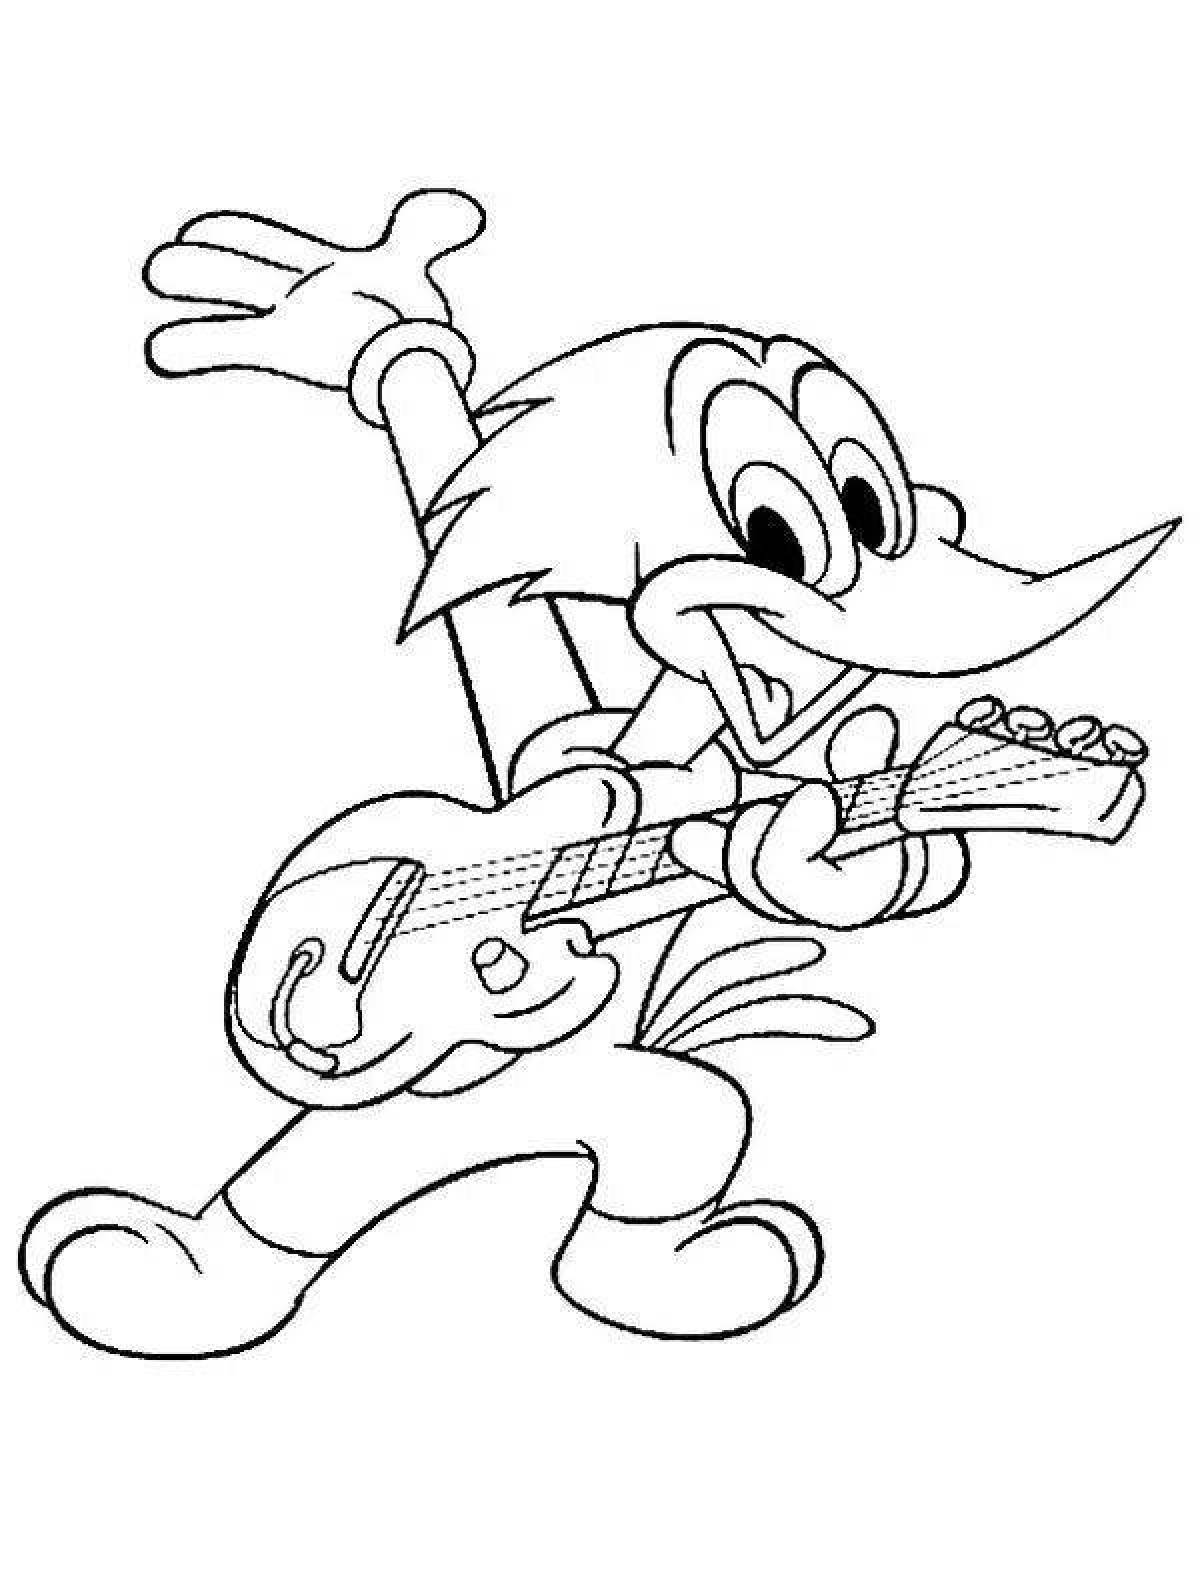 Exquisite woody woodpecker coloring book